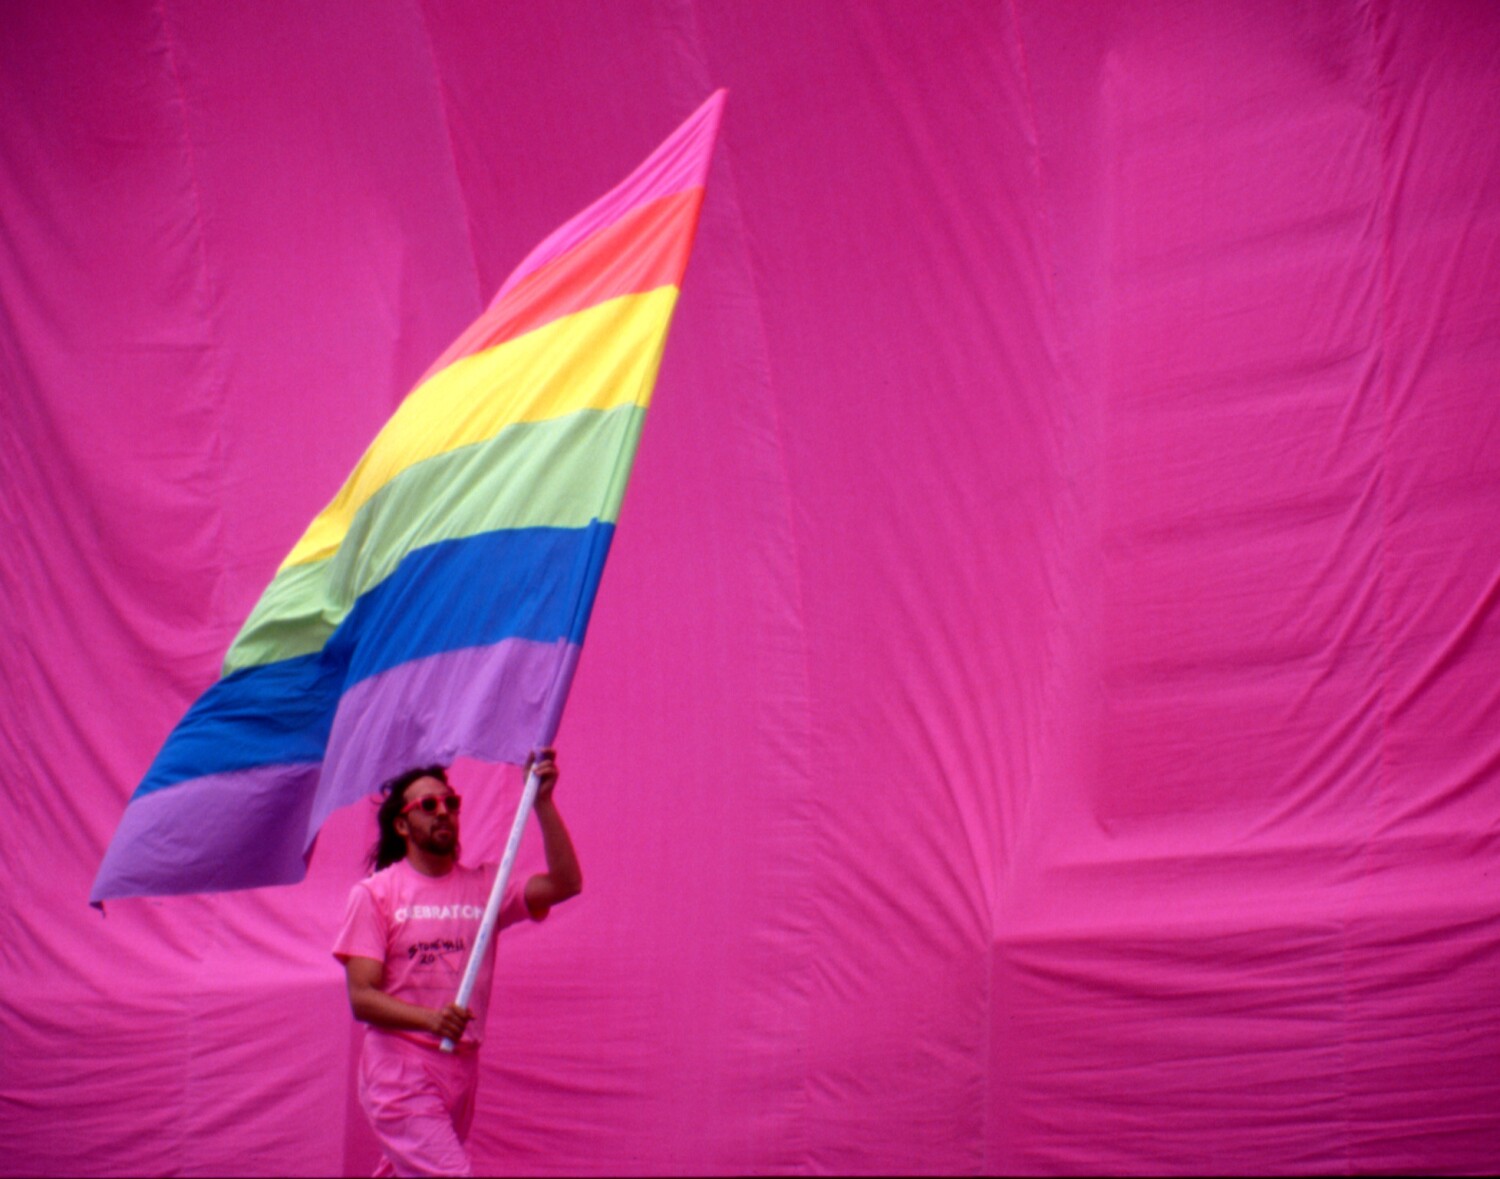 After 42 years, the original rainbow flag is coming home to San Francisco